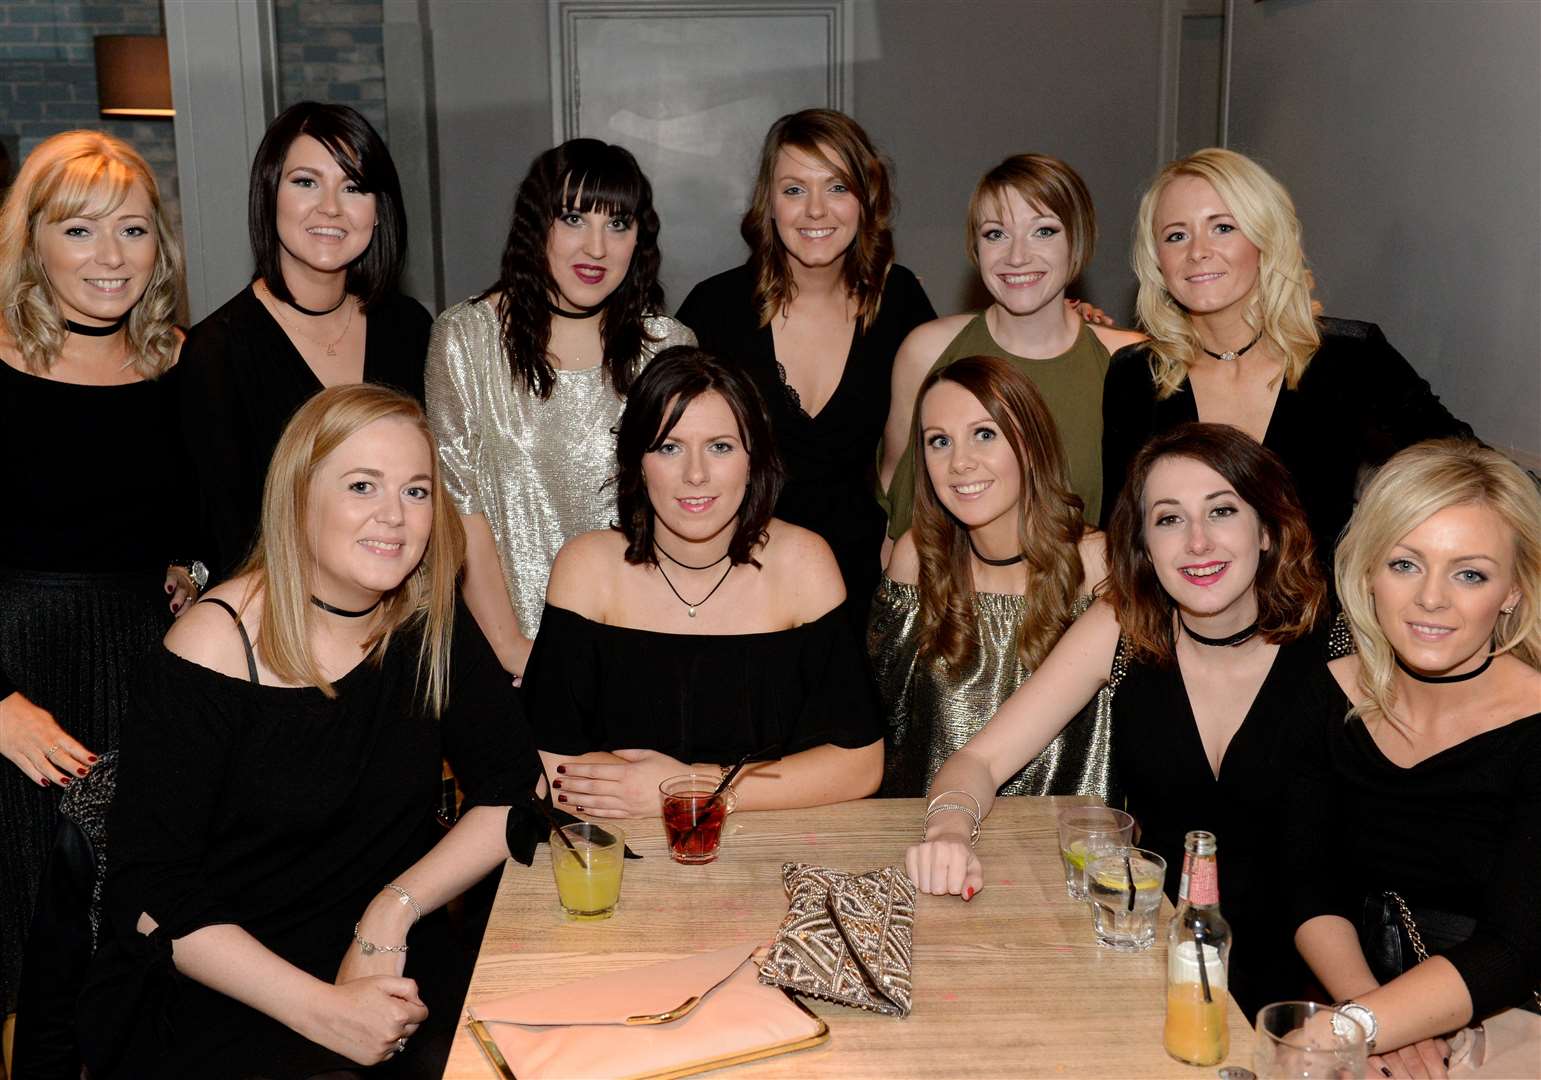 Sarah Robertson (centre) enjoying her 30th birthday with friends.